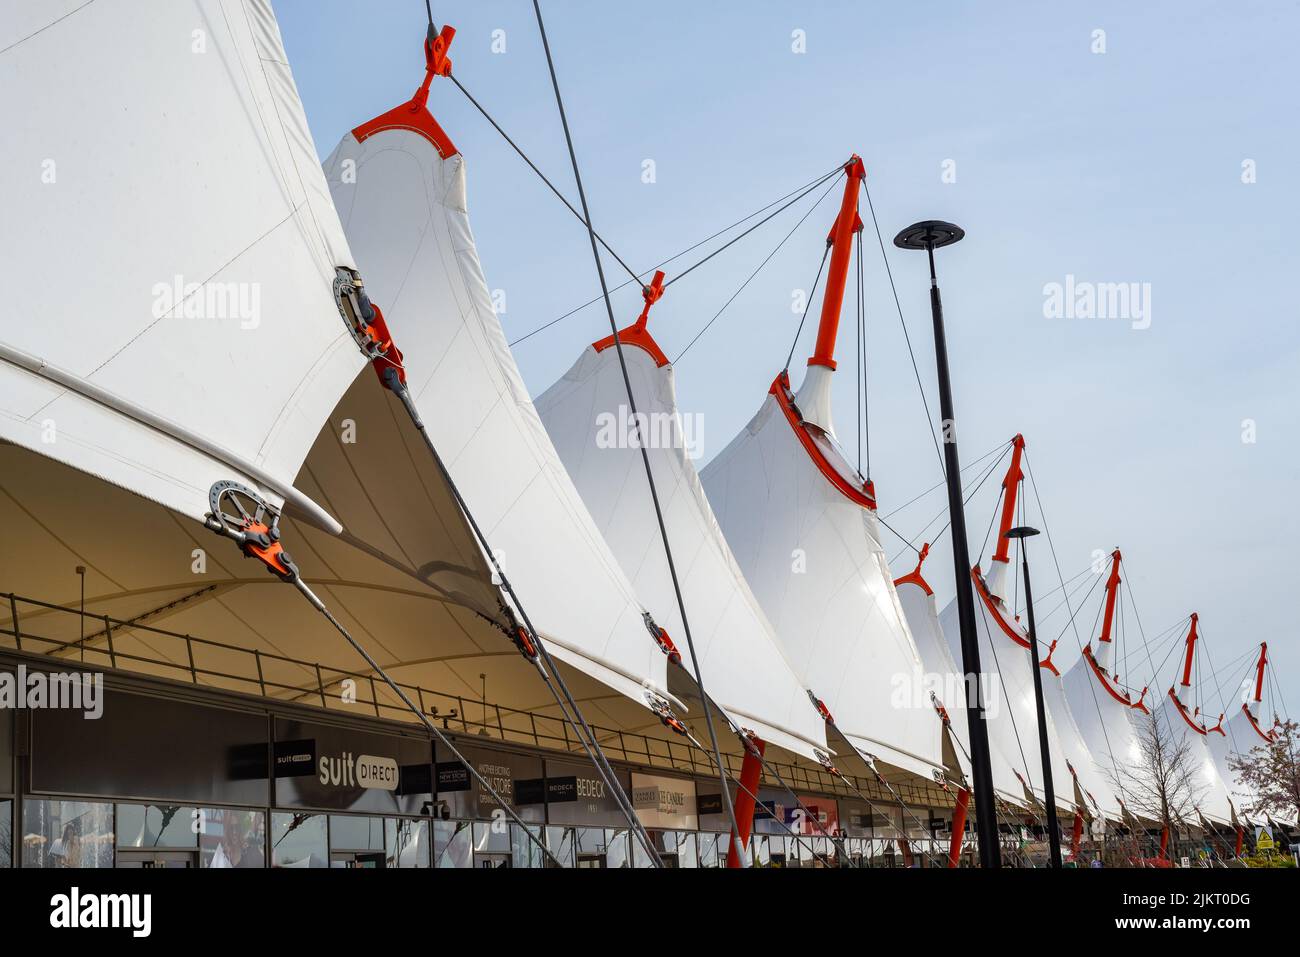 Close up view of the distinctive white roof canopy and shops underneath at Ashford Outlet Center, Kent, England.  Stock Photo